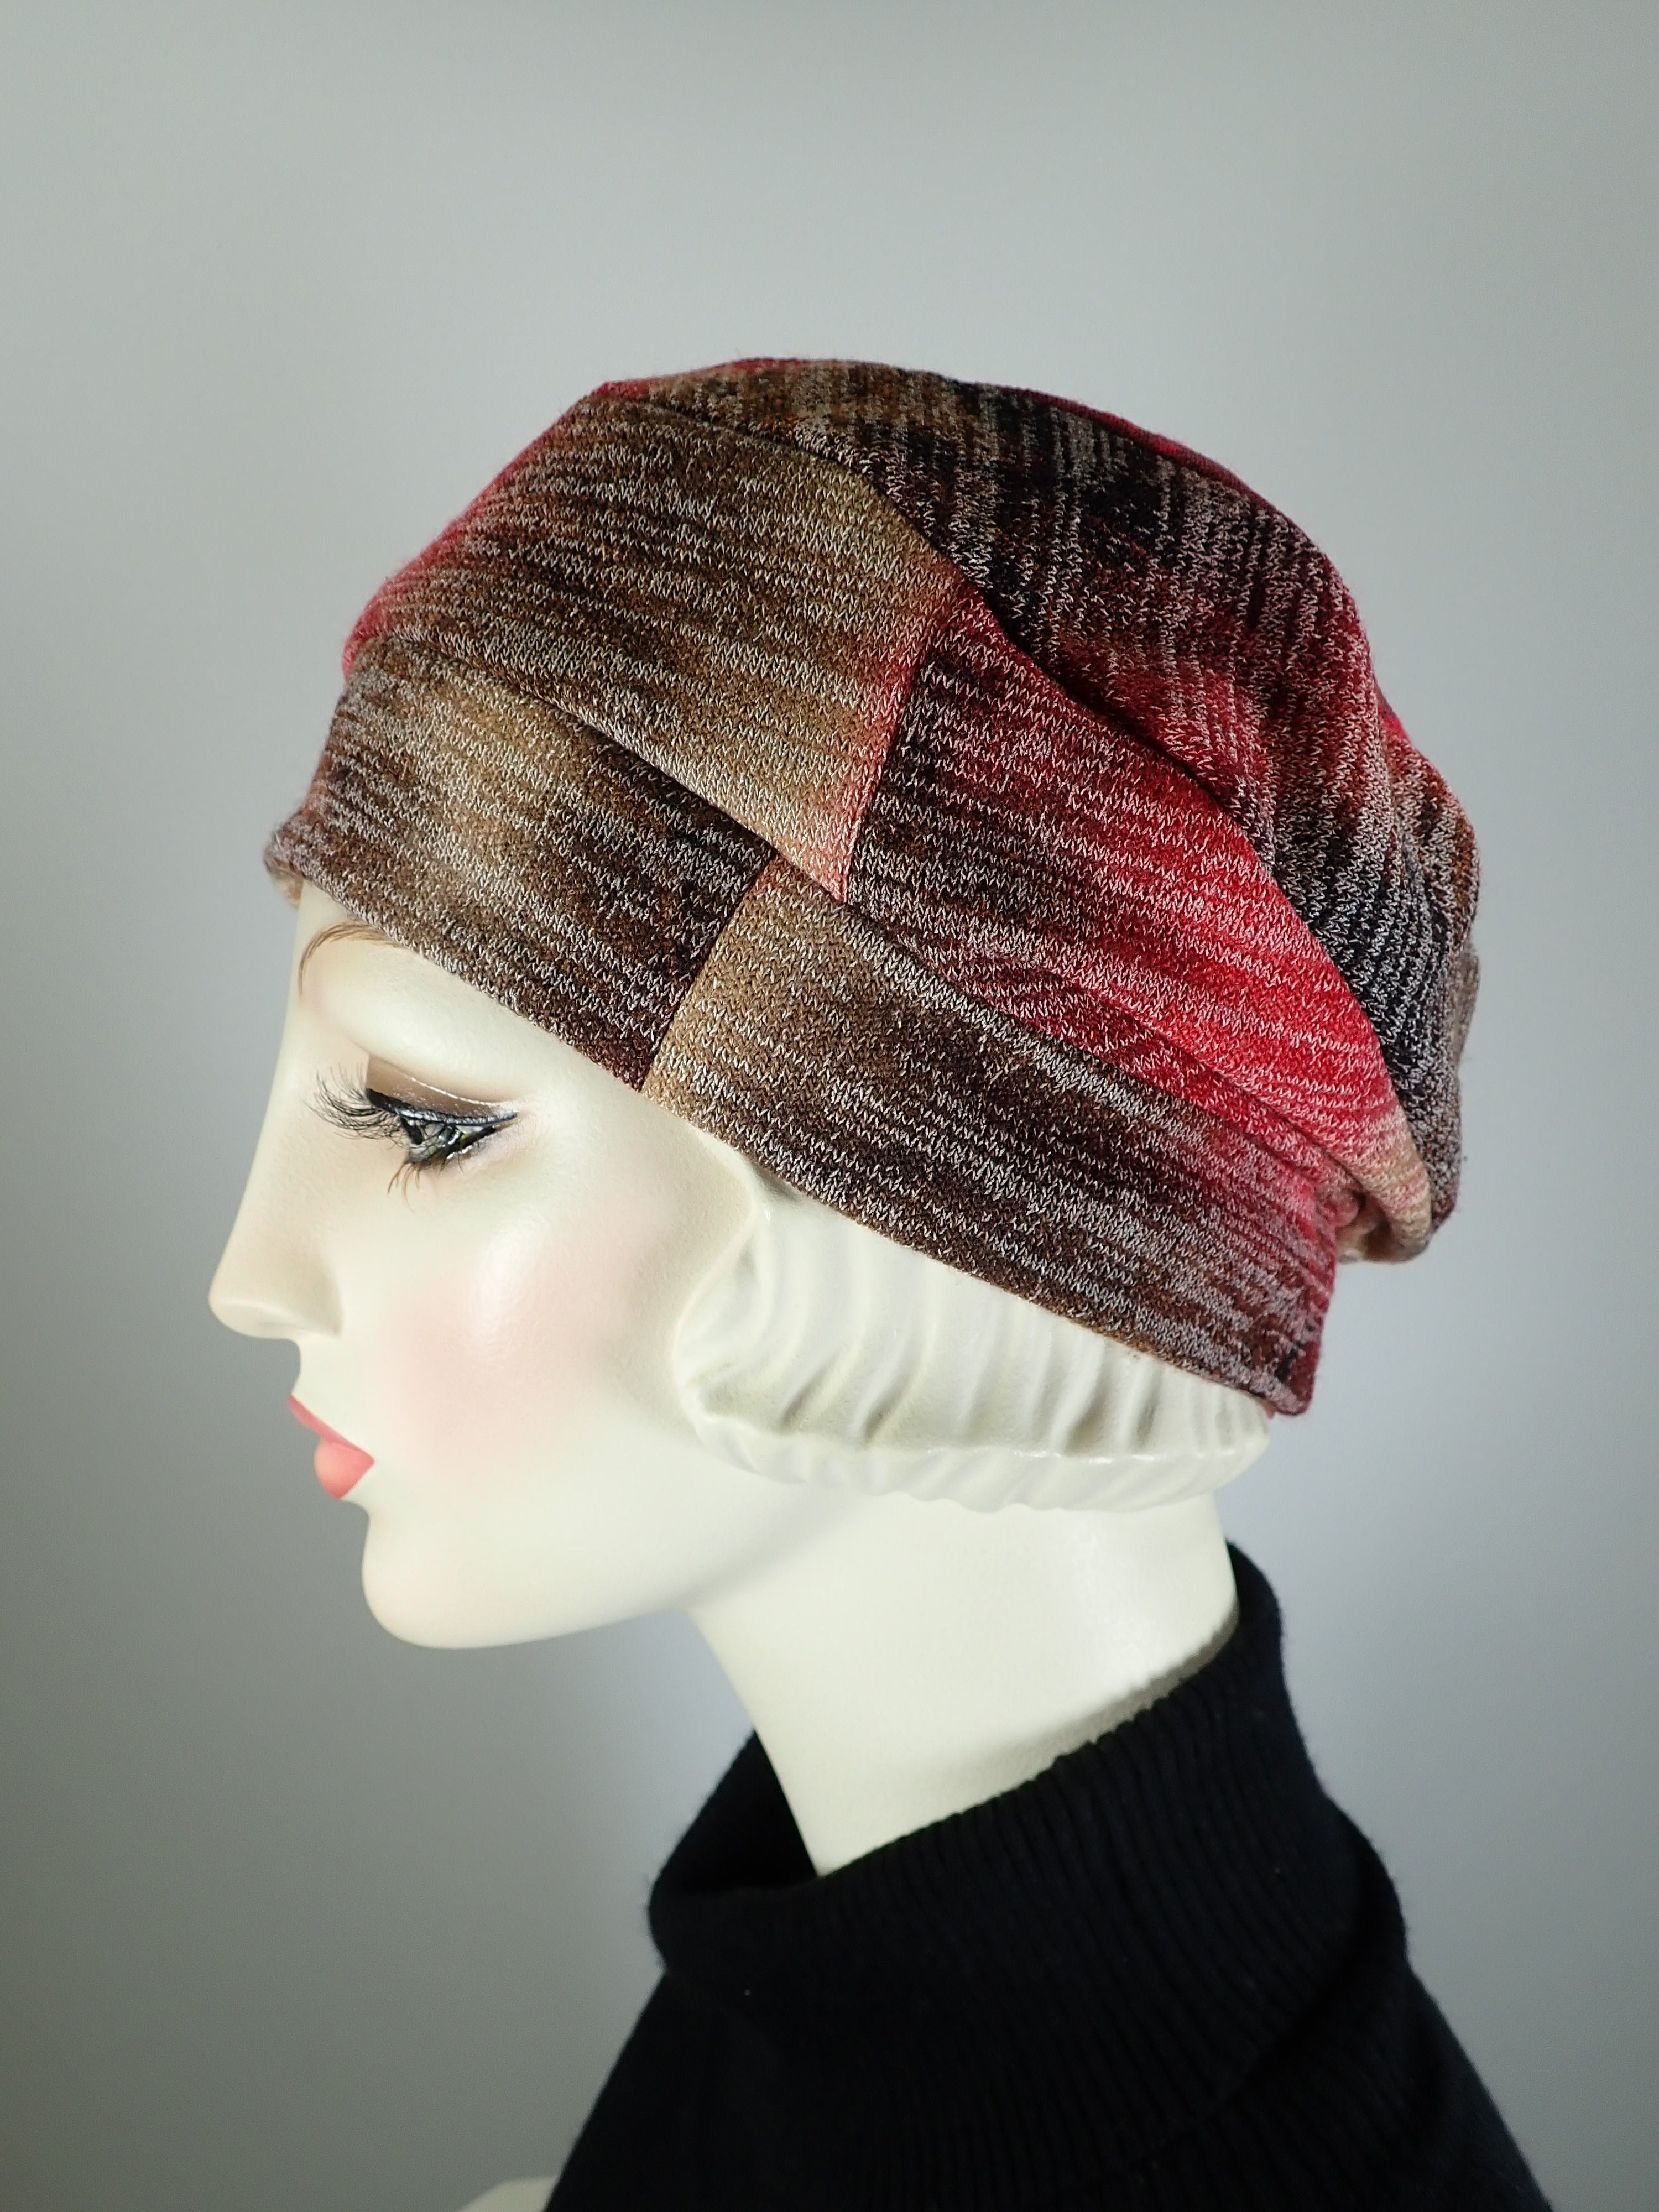 Womens Slouchy Beret. Knit red brown Hat. Slouch Eco friendly Hat. Boho chic casual hat. Ladies travel hat. Stylish fabric hat.